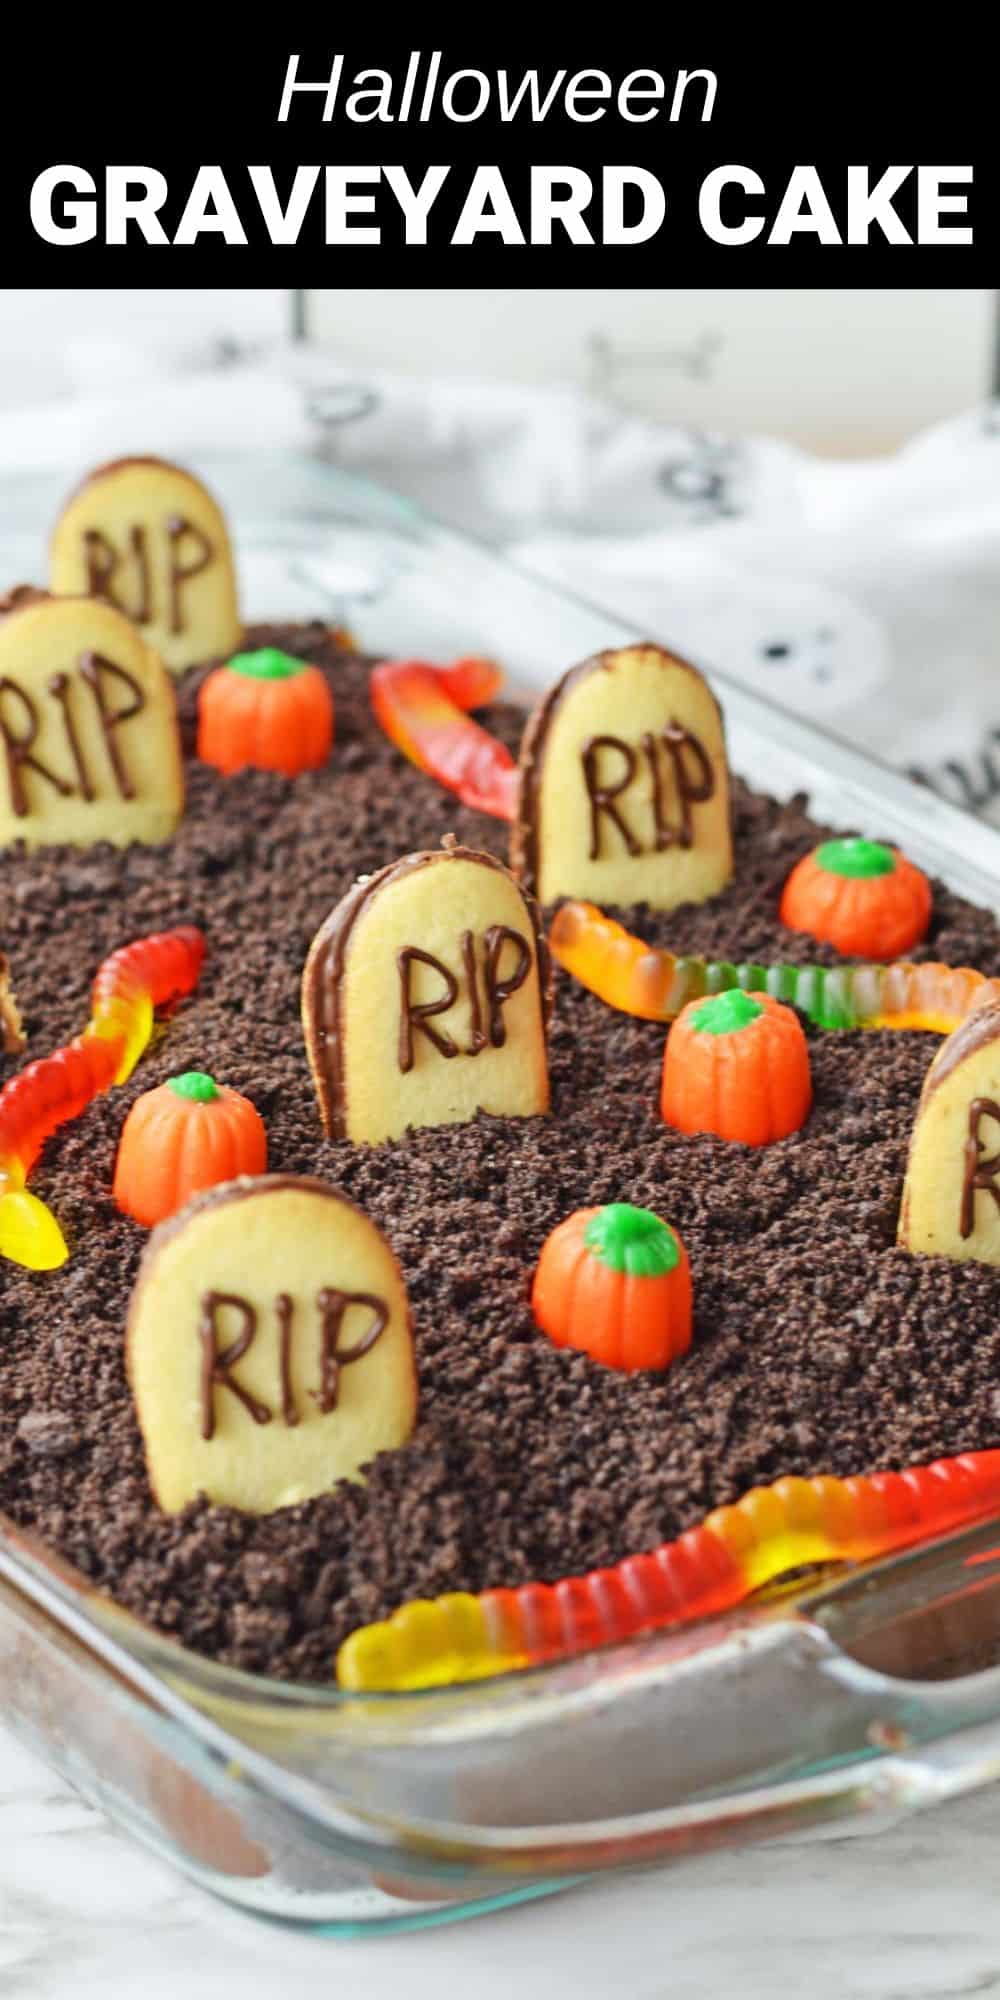 This dark chocolate graveyard cake is one of our favorite Halloween recipes. It’s delicious, easy to make, and guaranteed to impress your party guests. Plus, its festive and spooky appearance will get everyone in the mood to celebrate Halloween!